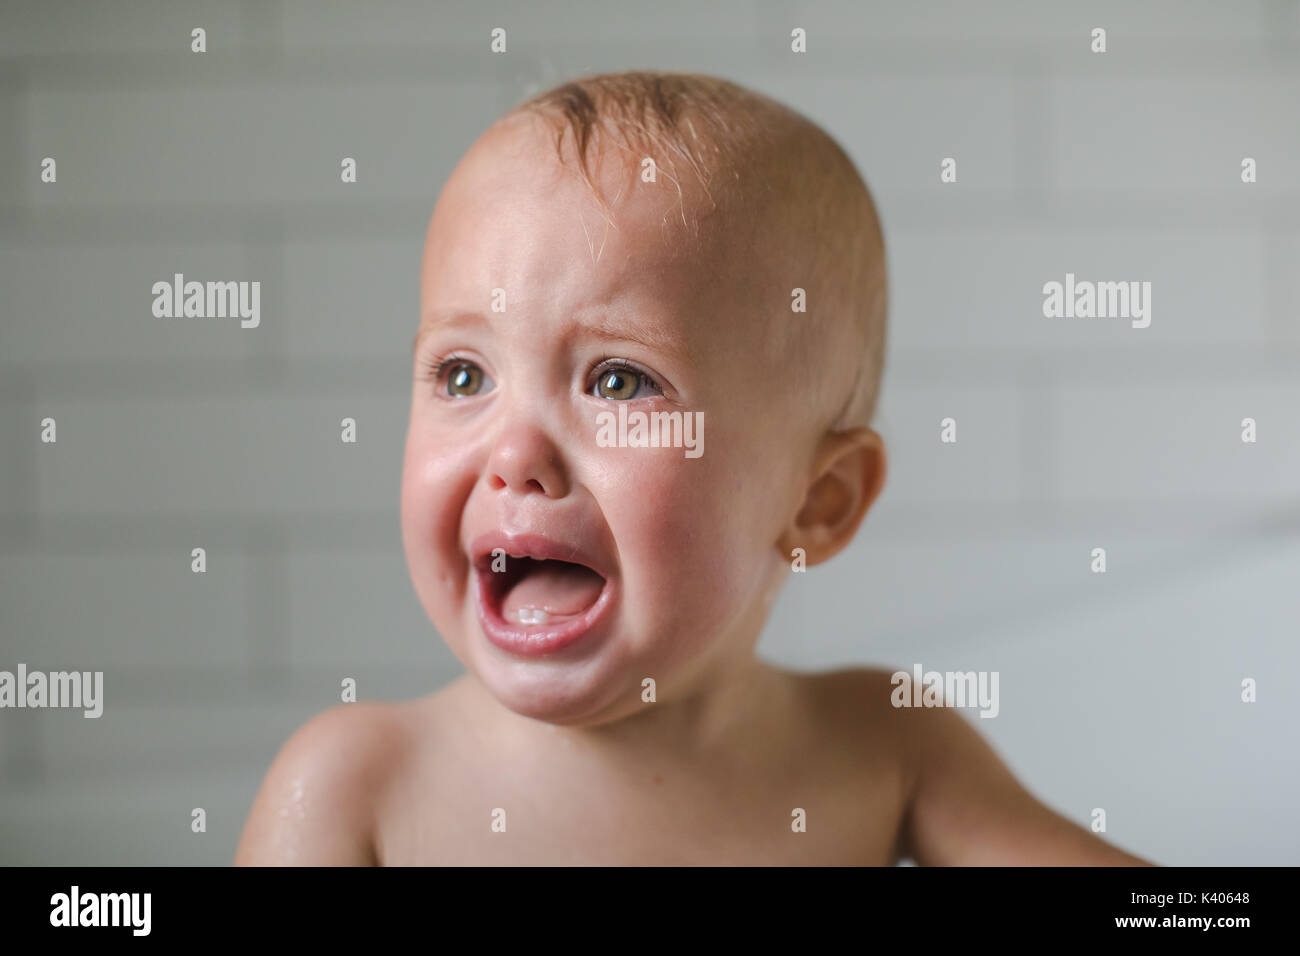 One-year-old baby cries close-up in the bathroom on a white background Stock Photo